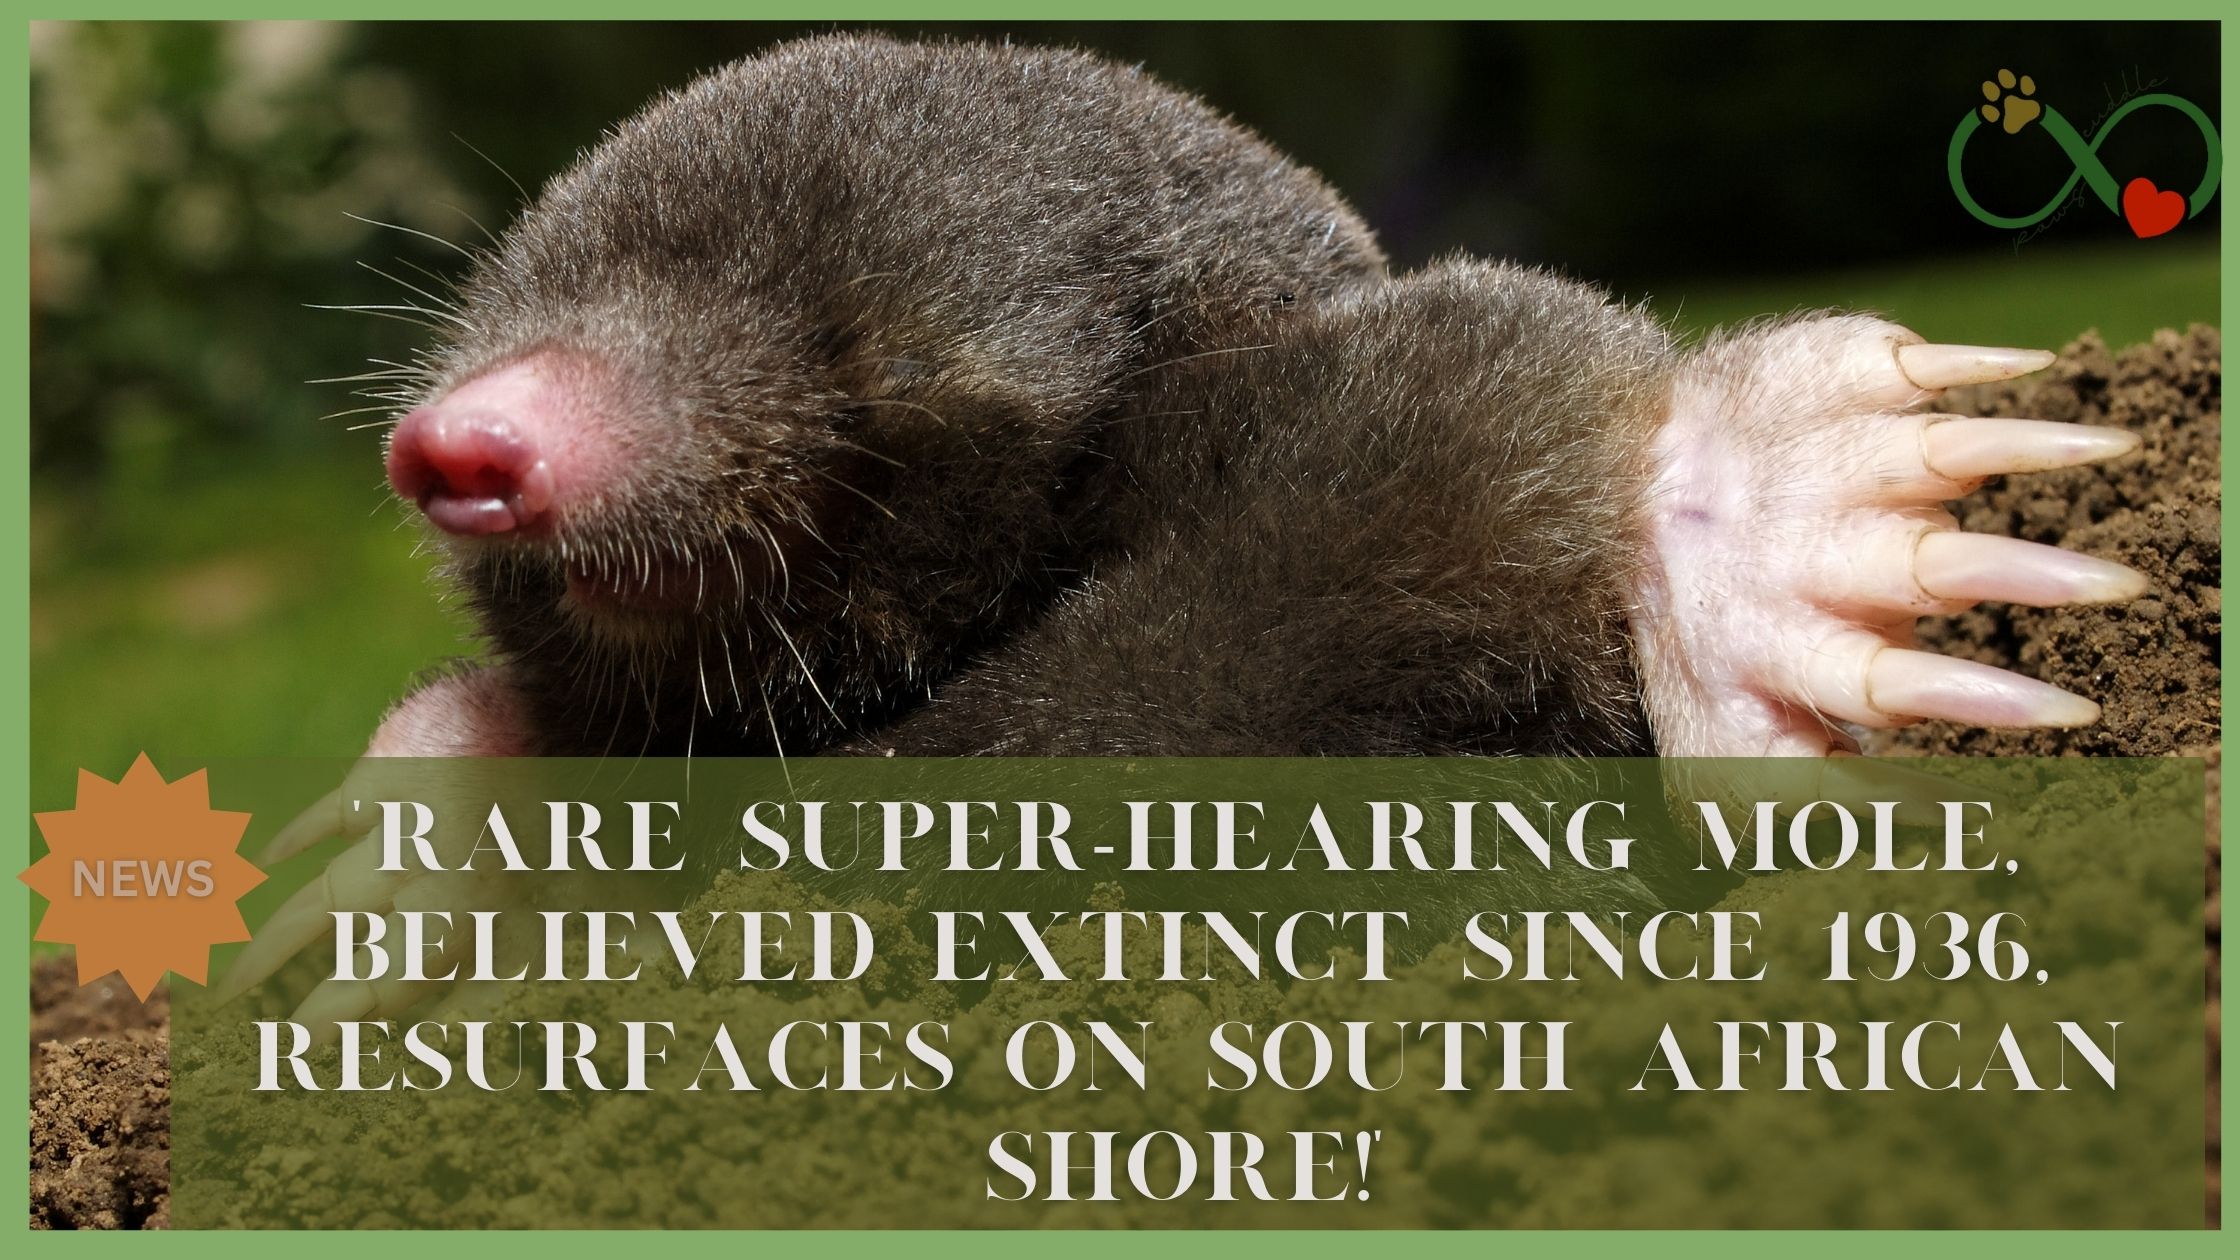 "Rare Super-Hearing Mole, Believed Extinct Since 1936, Resurfaces on South African Shore!"